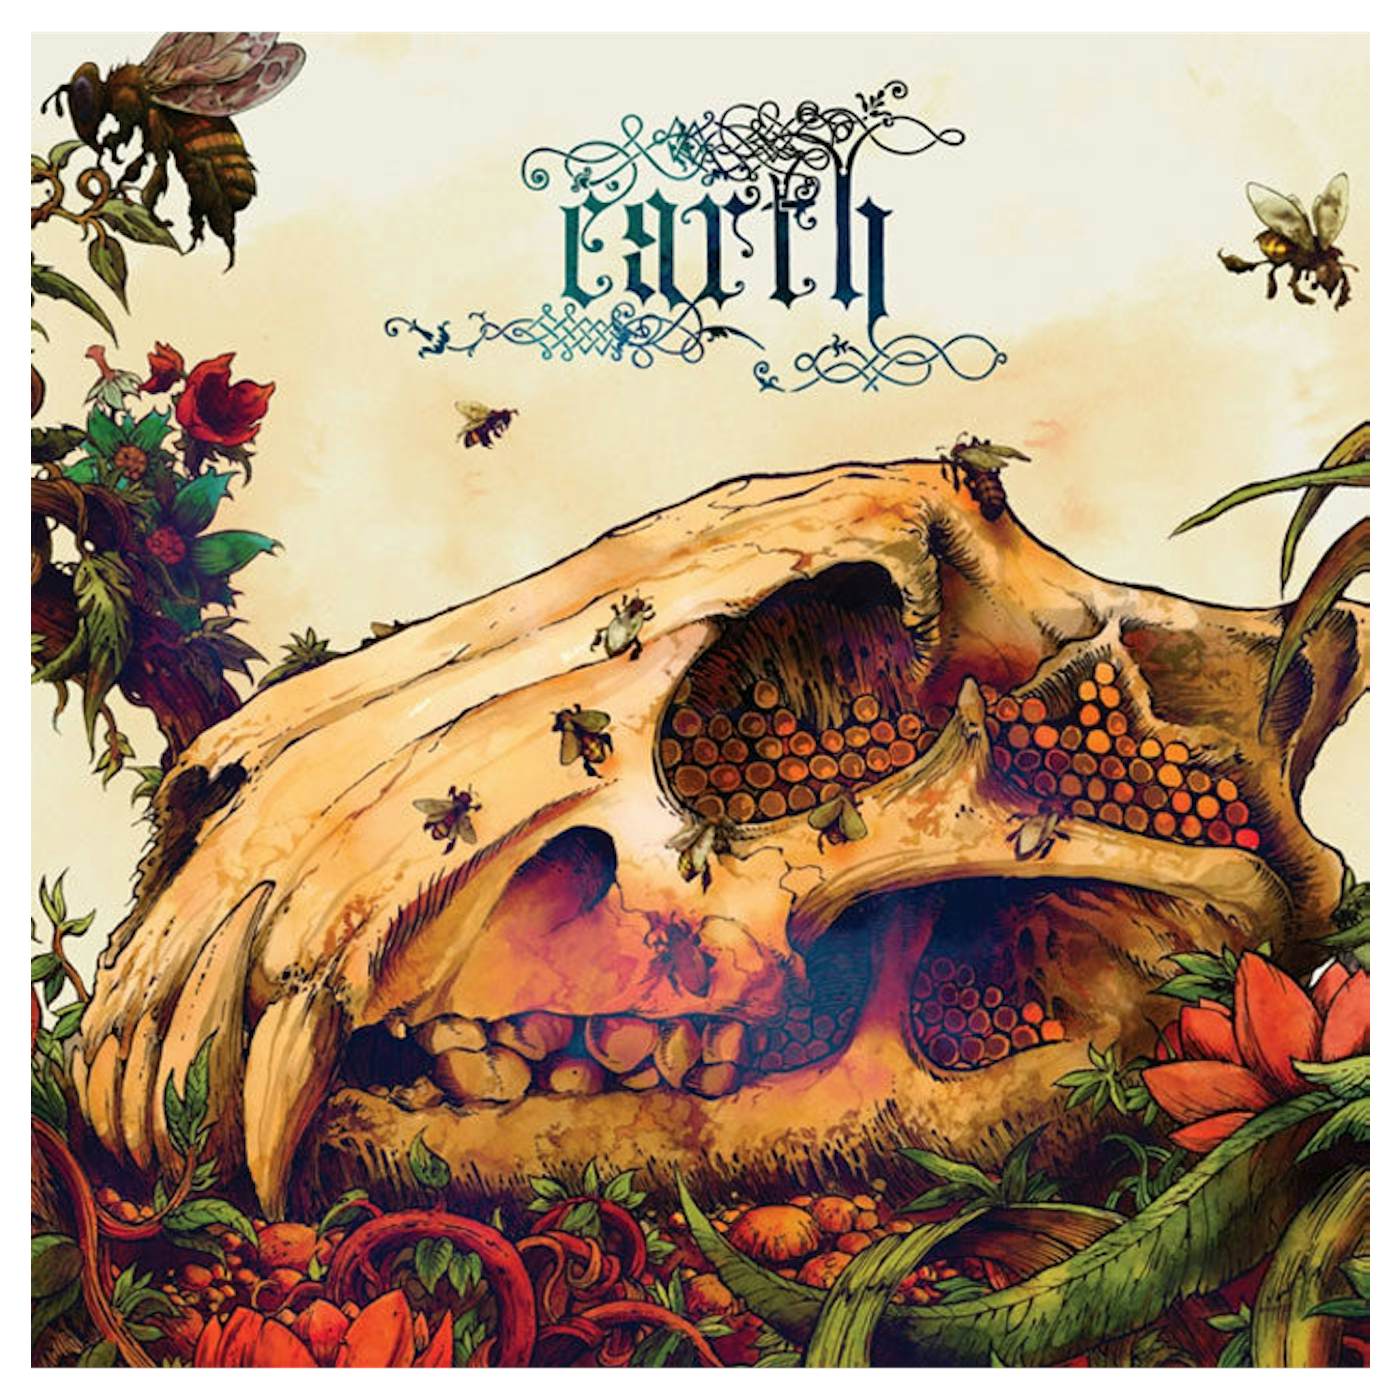 EARTH - 'The Bees Made Honey In The Lion's Skull' CD